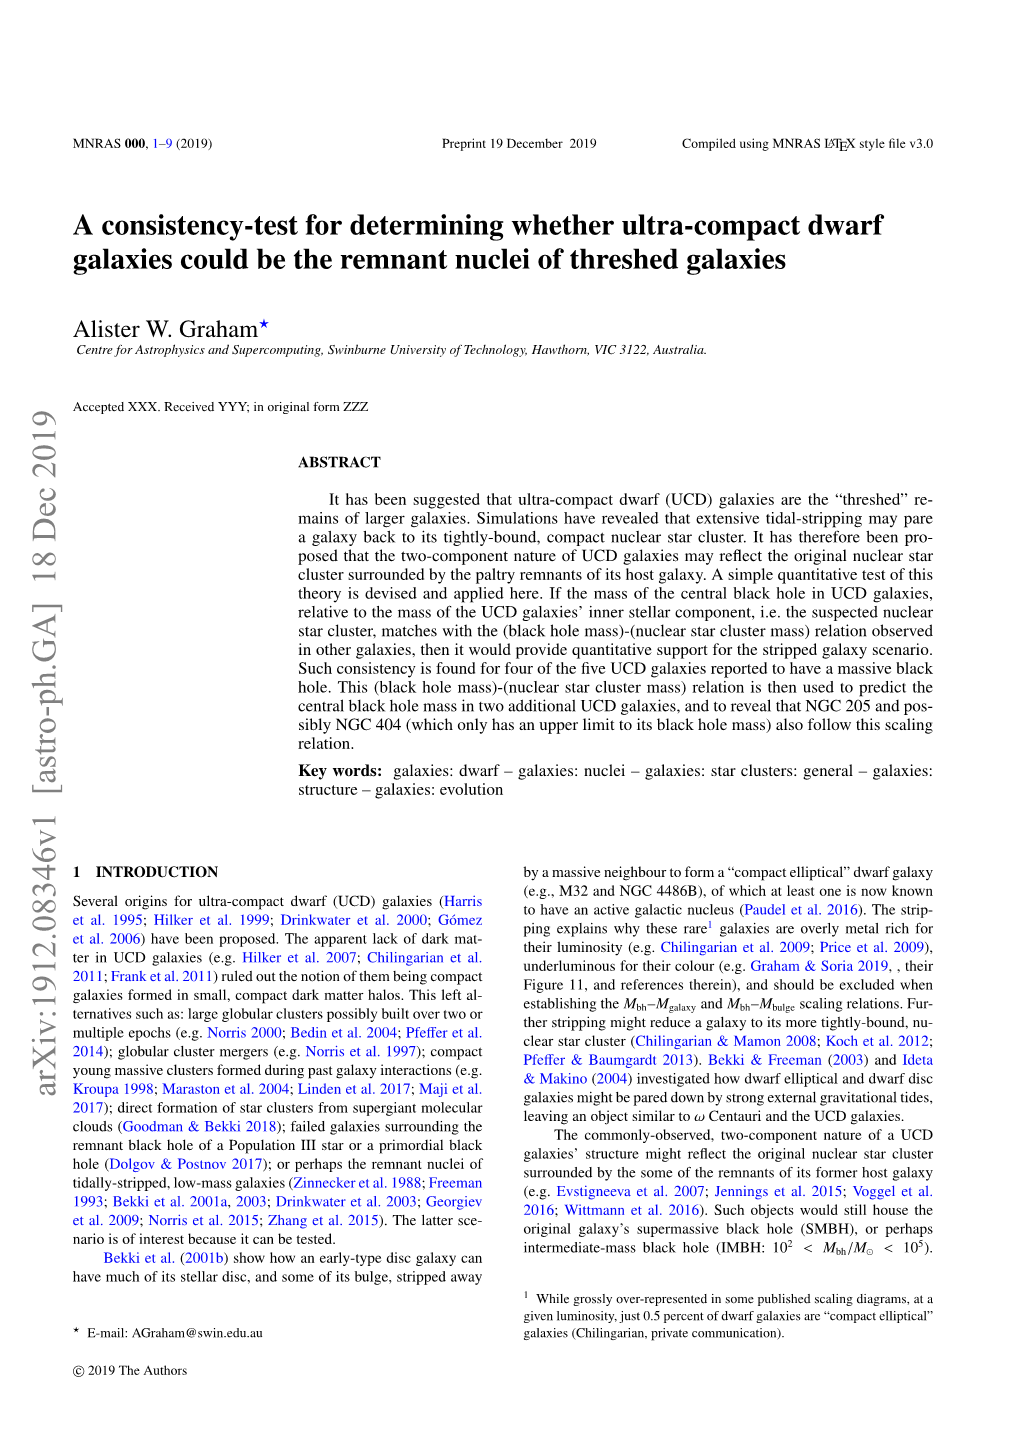 A Consistency-Test for Determining Whether Ultra-Compact Dwarf Galaxies Could Be the Remnant Nuclei of Threshed Galaxies